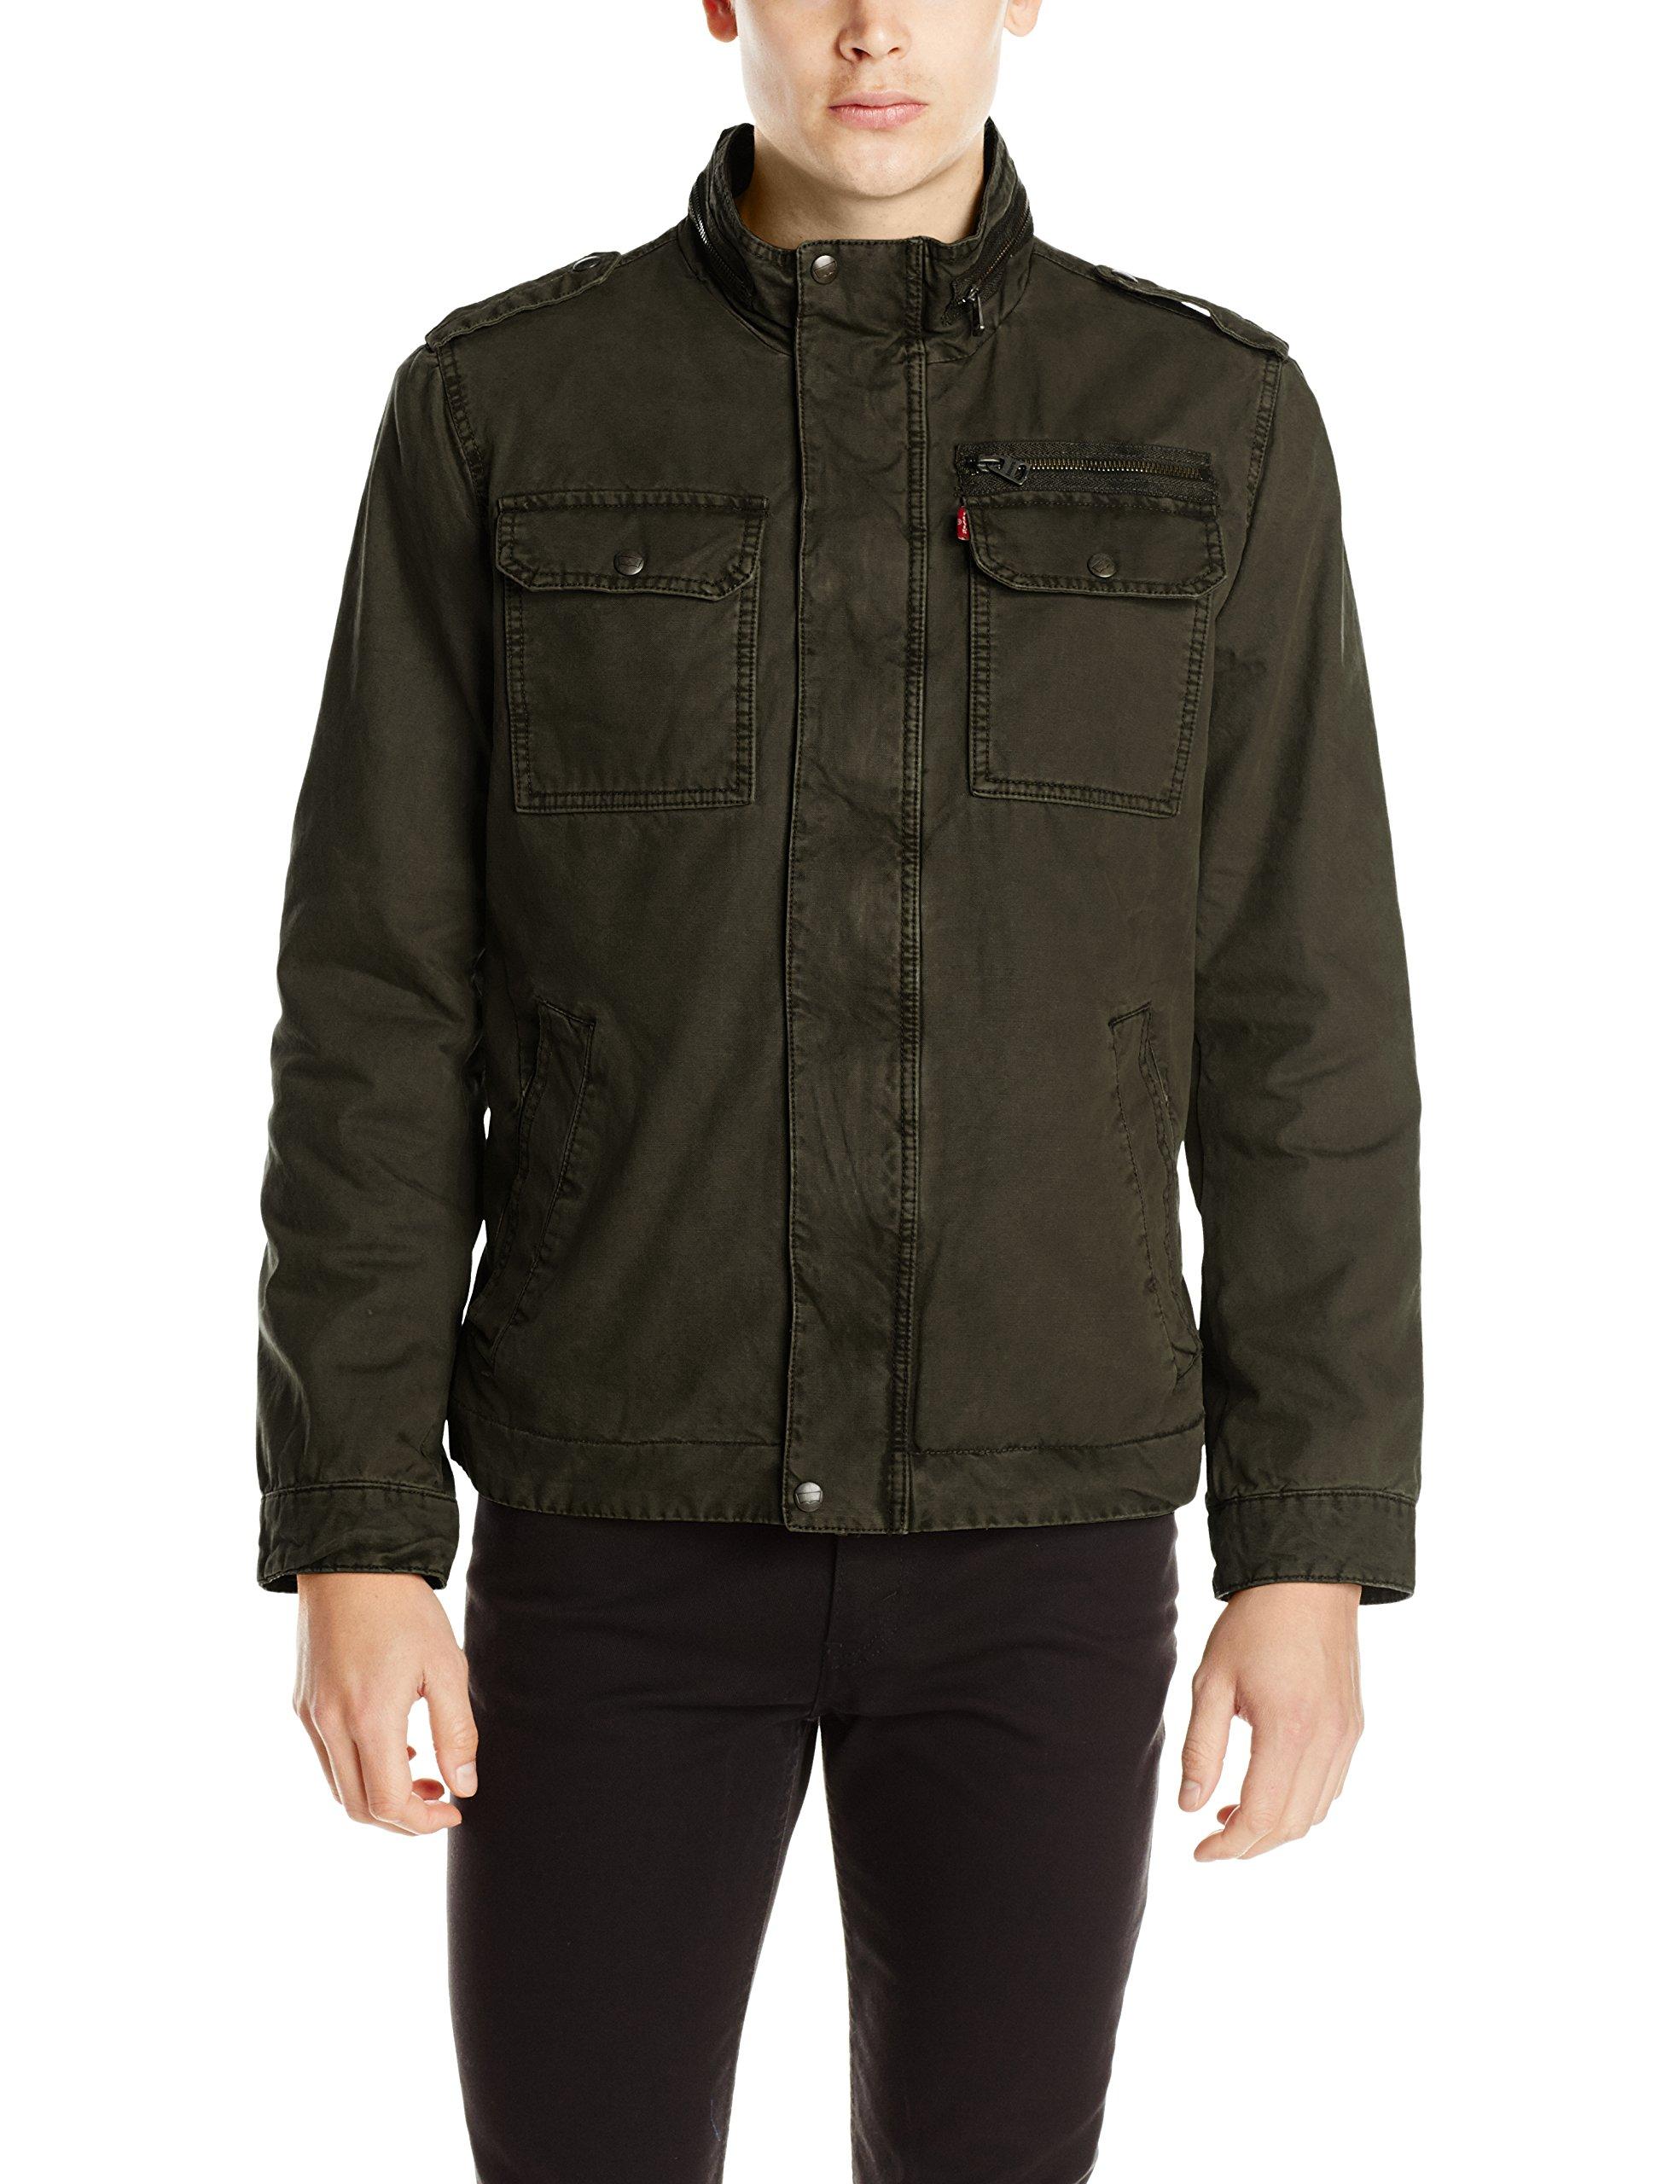 Levi's Men's Washed Cotton Two Pocket Military Jacket Big & Tall